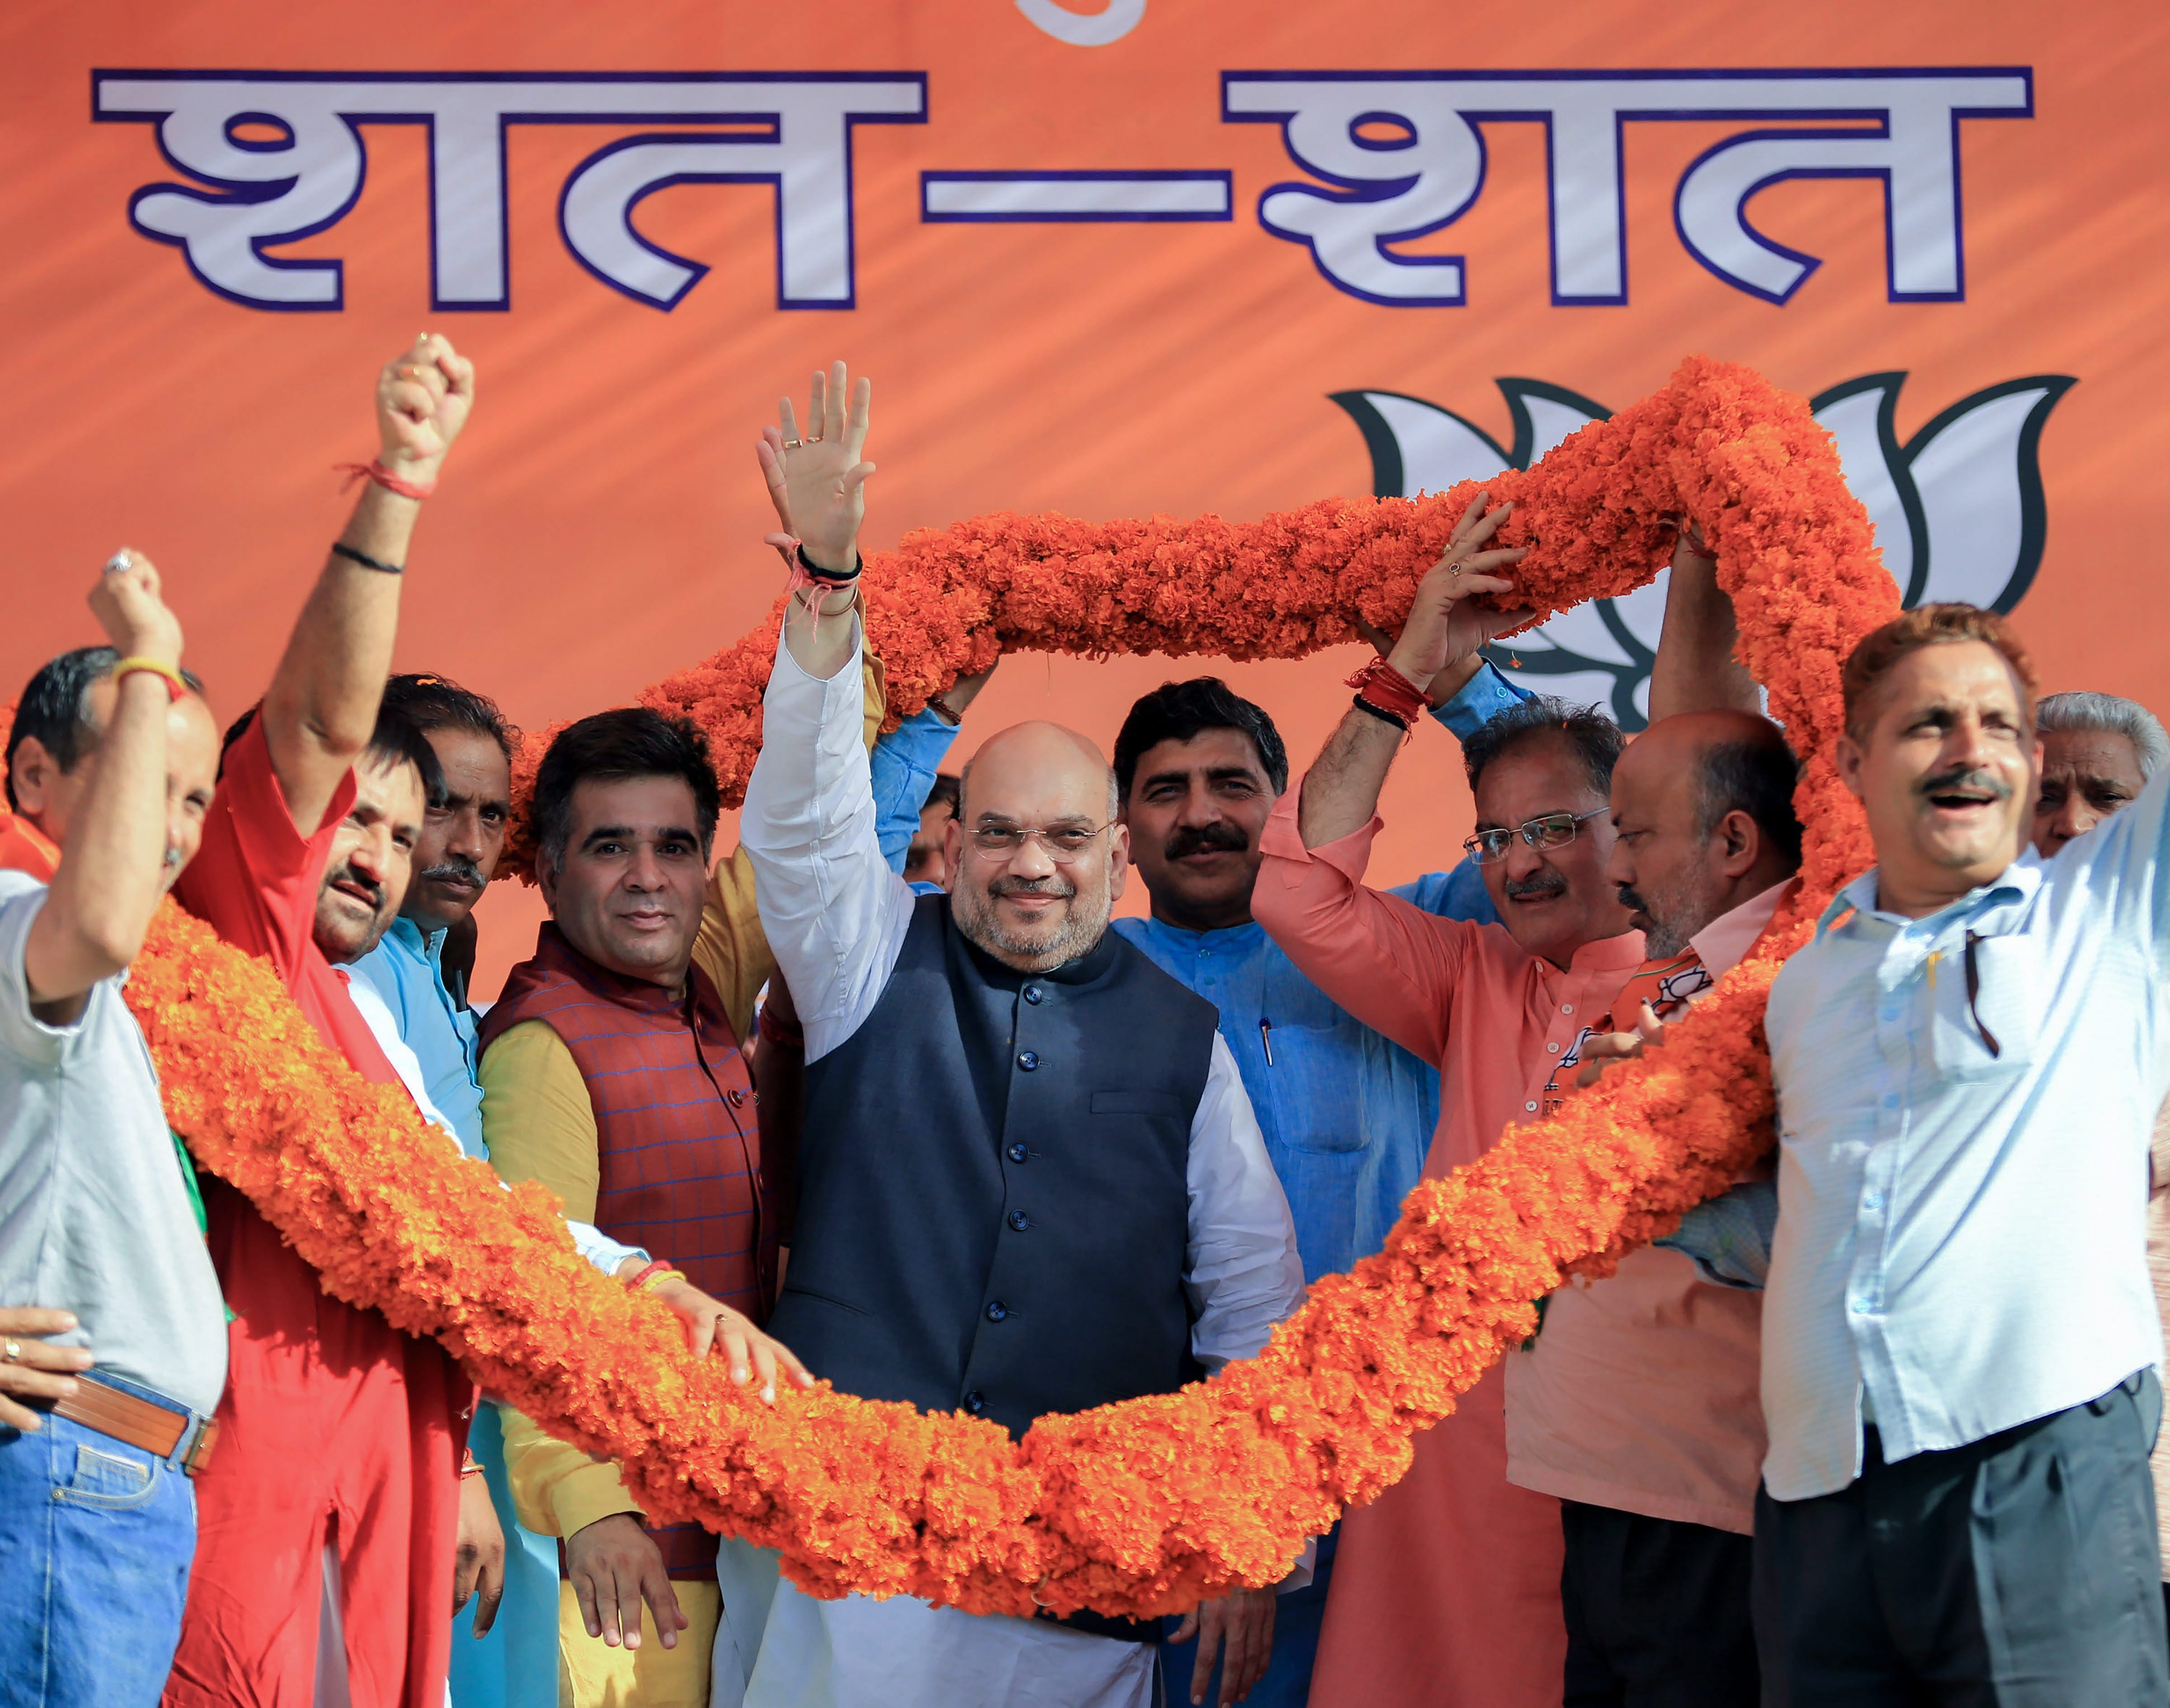 Ahead of BJP president Amit Shah’s scheduled Madhya Pradesh election tour from October 6, the party’s state leadership has deliberated on how to keep its flock together.